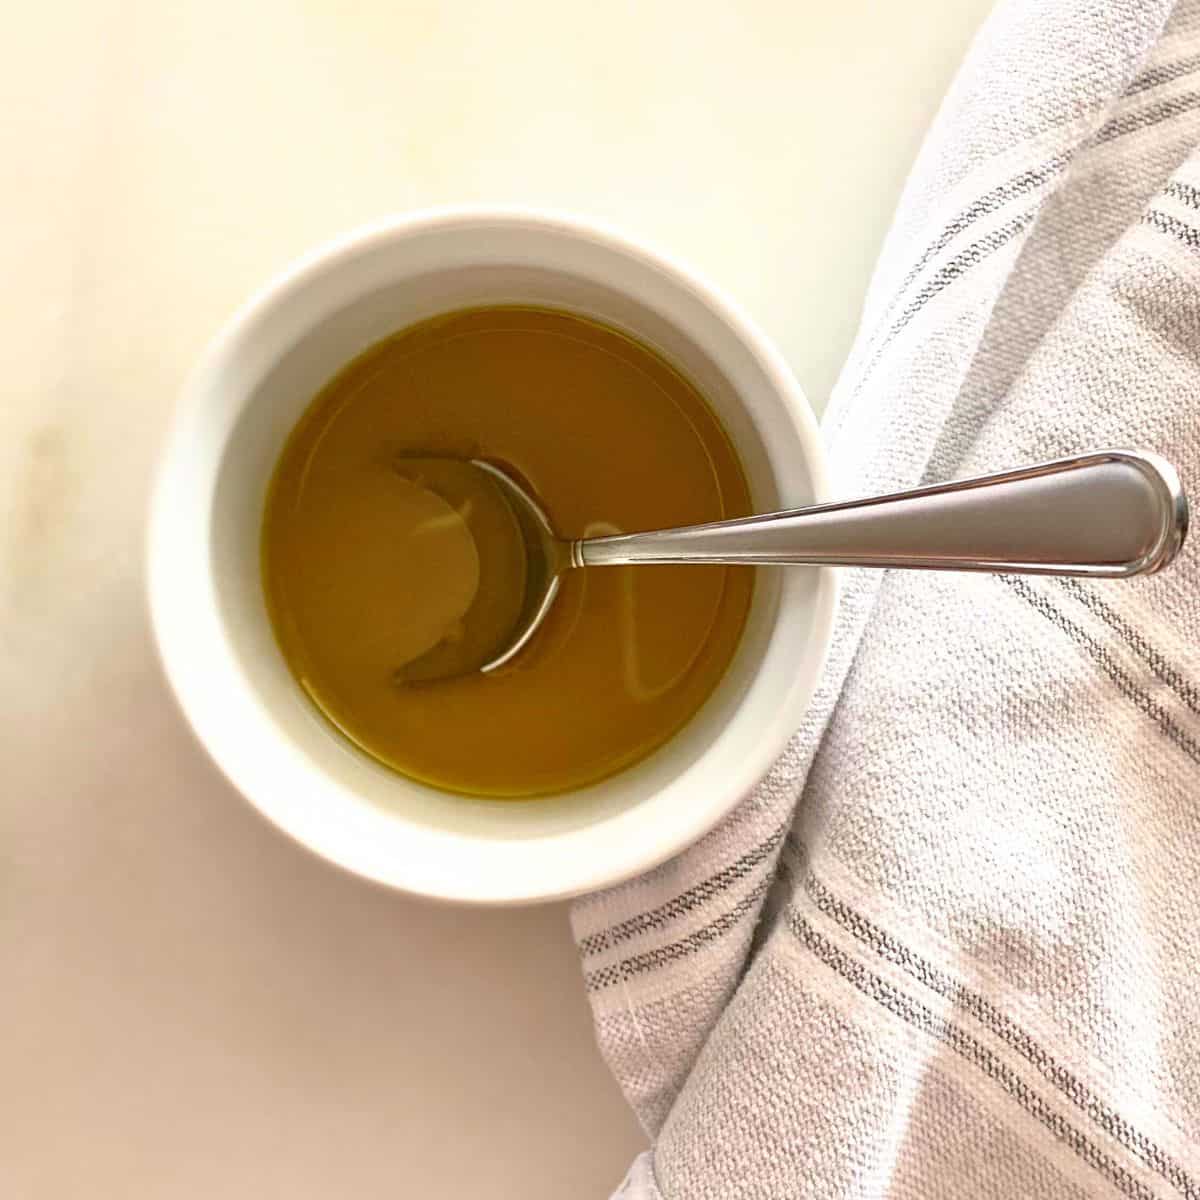 Top view of lemon olive oil dressing in a white ramekin with a stainless steel soup spoon